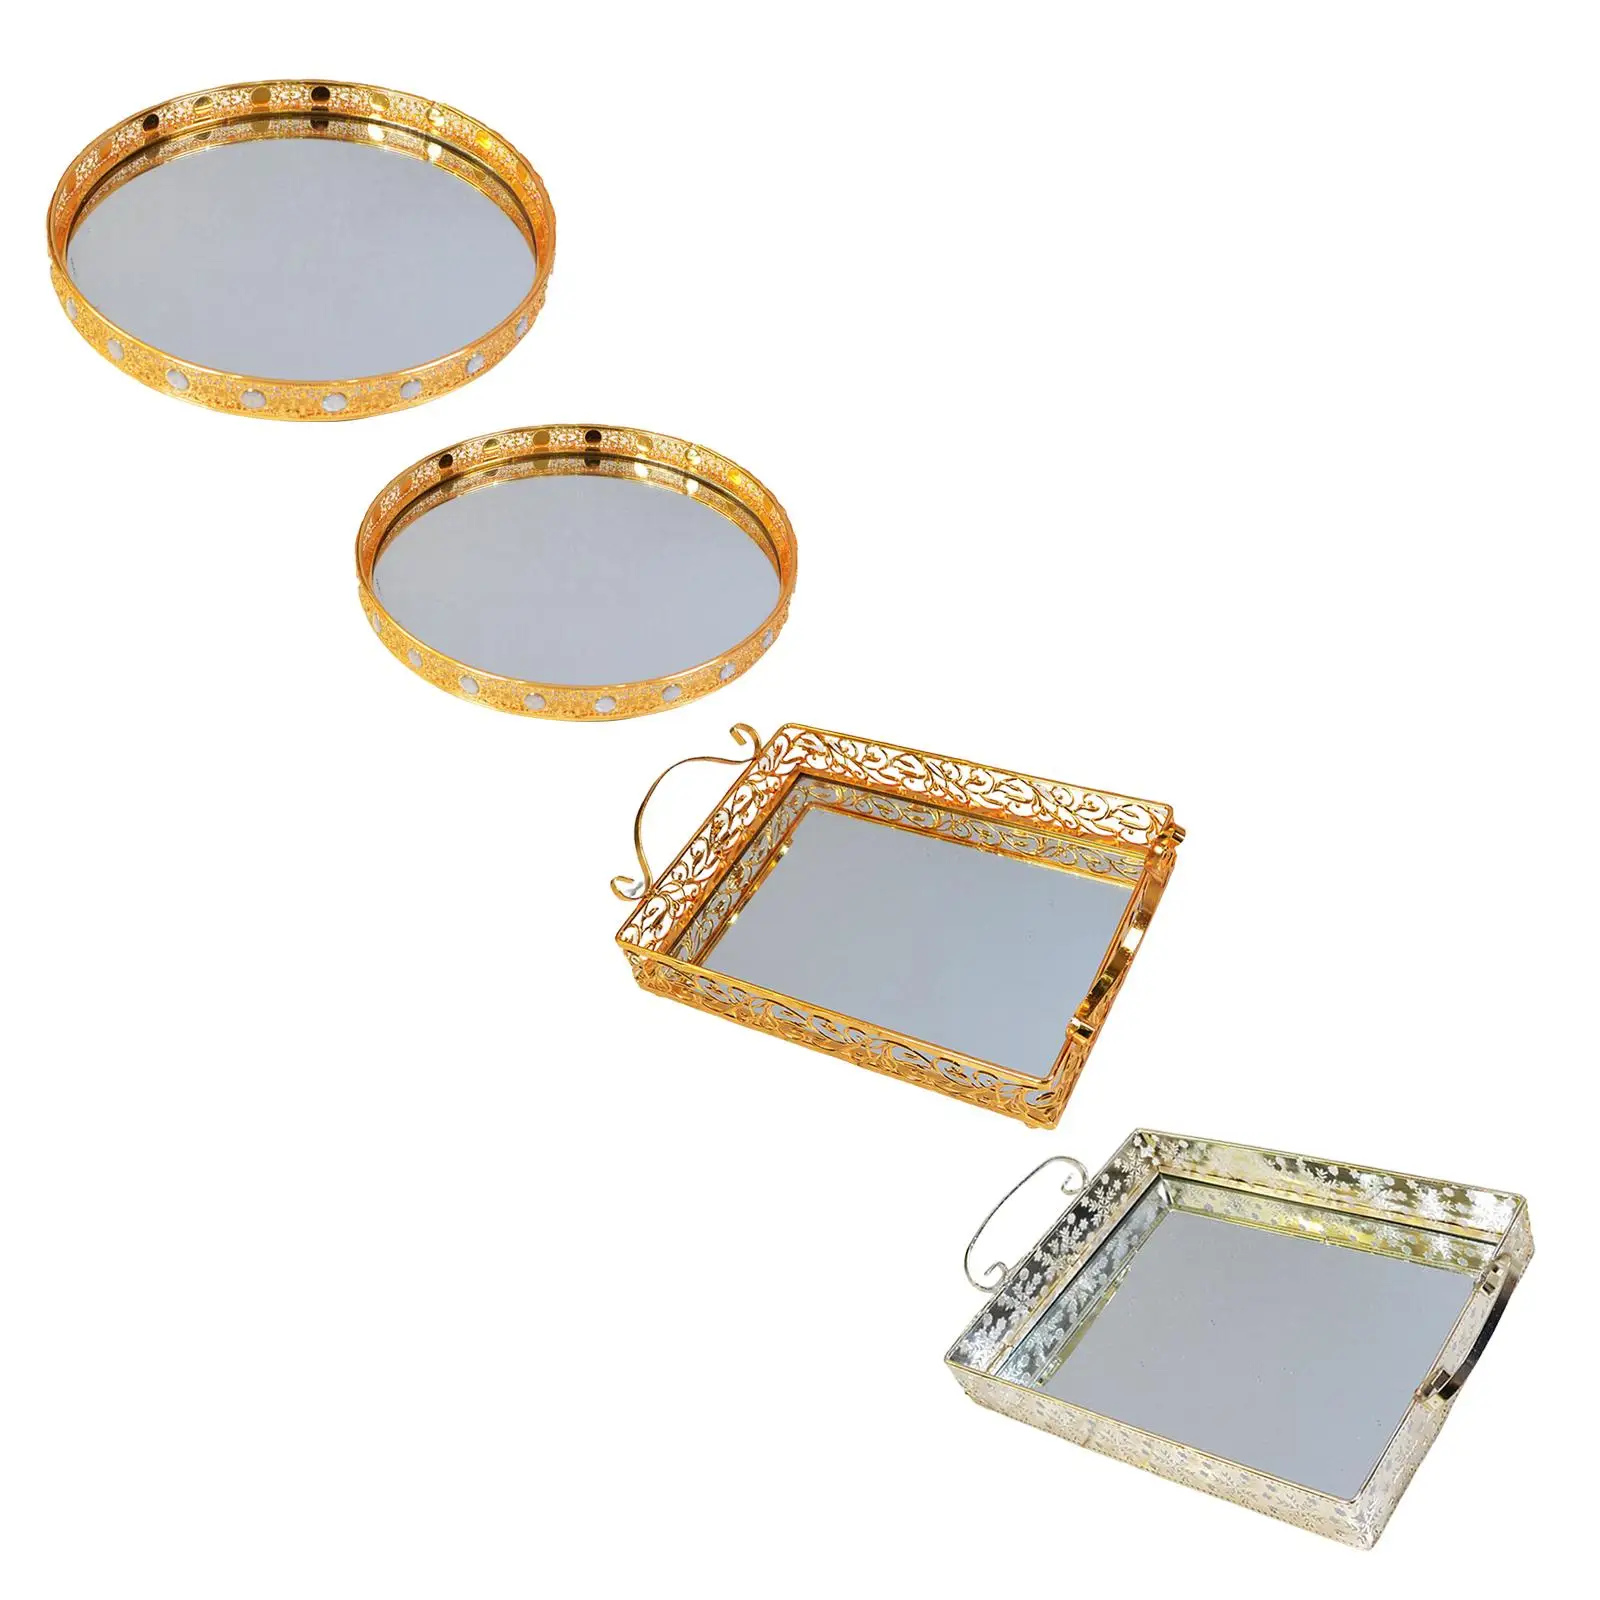 Cosmetic Makeup Tray Table Centerpiece Mirrored Jewelry Trinket Tray Decorative Mirror Tray for Wedding Bedroom Dresser Bathroom